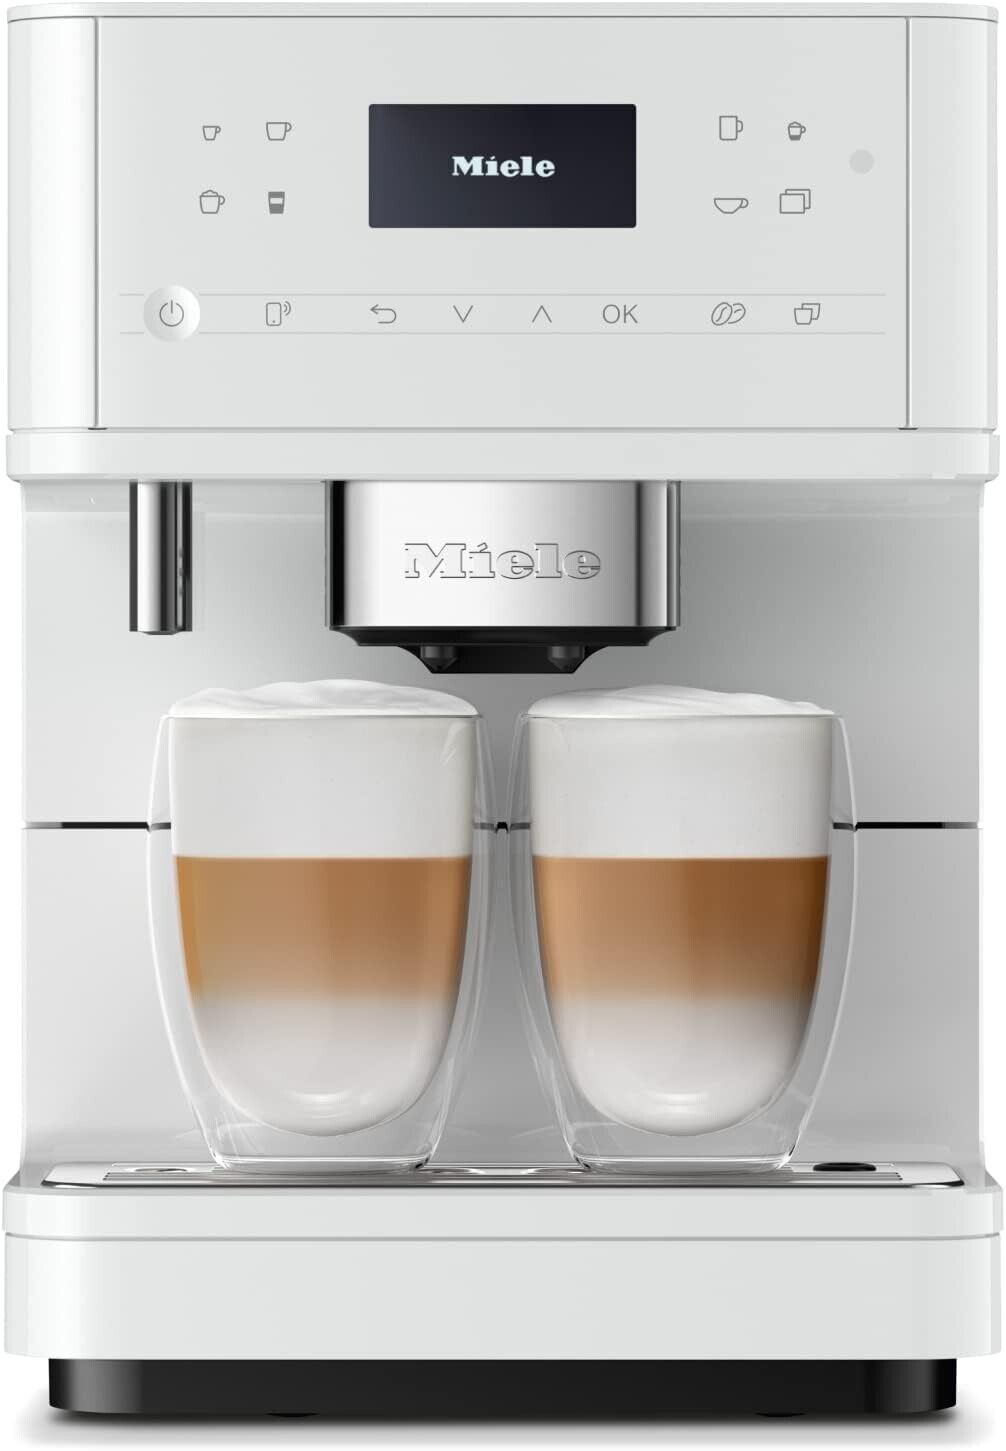 Primary image for Miele CM 6160 MilkPerfection LOWS Bean to Cup Coffee Machine, Variety of Drinks